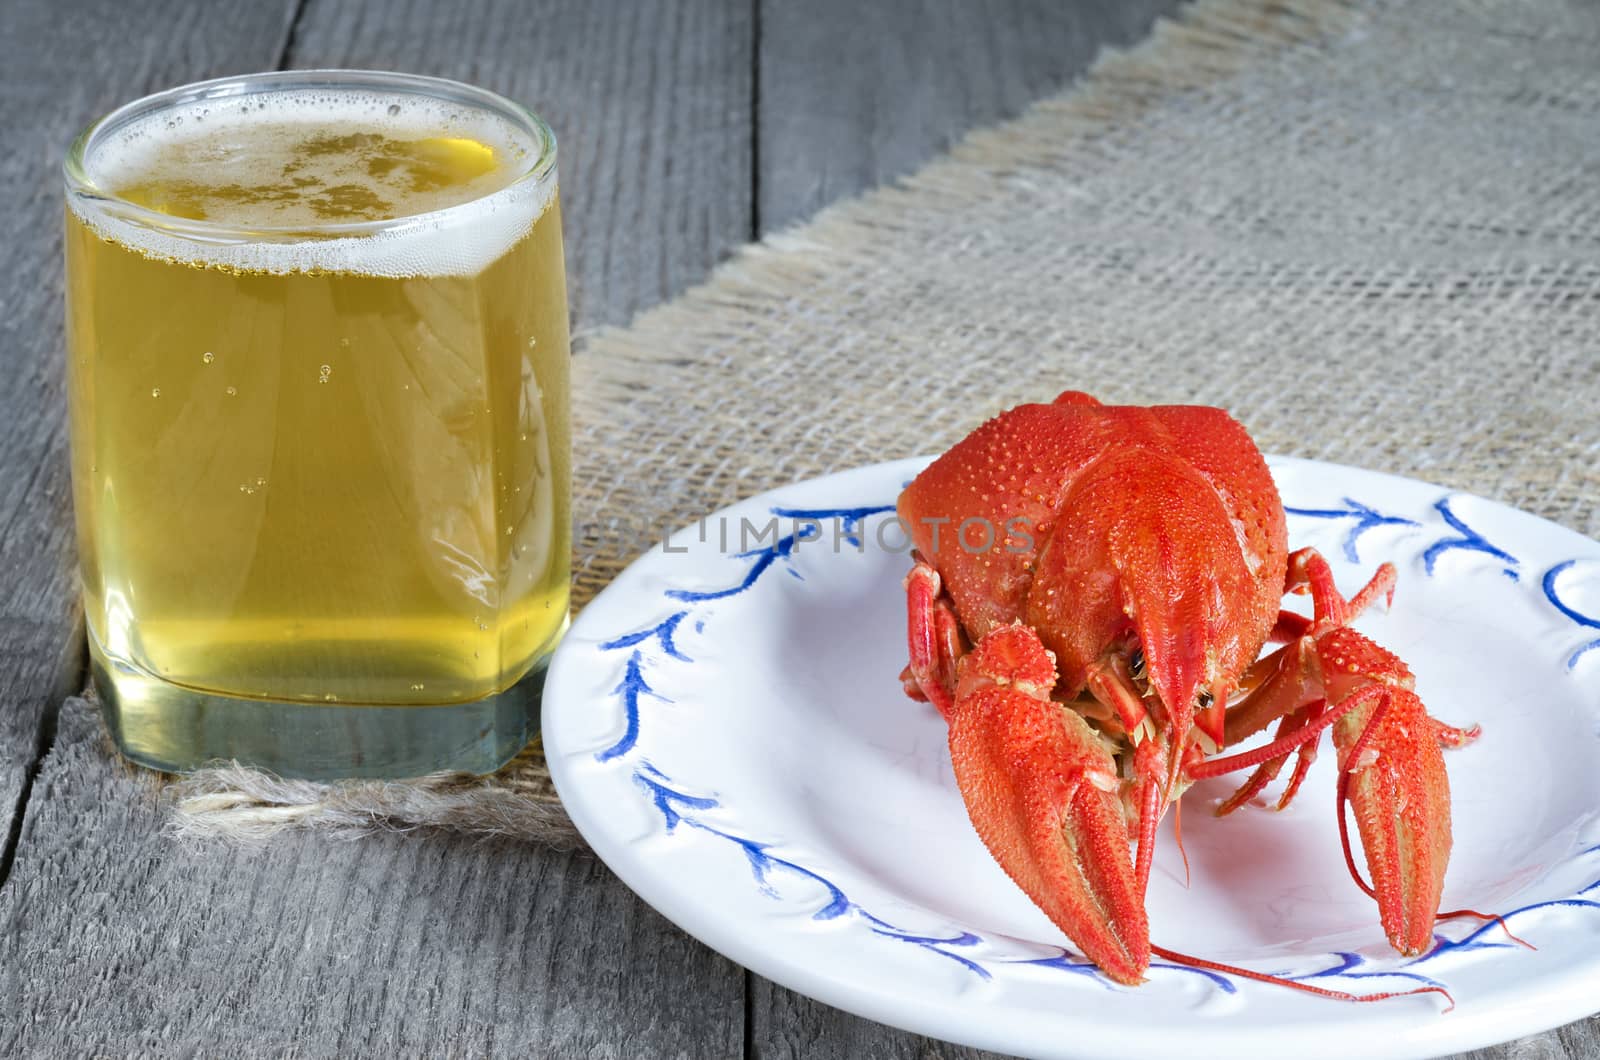 Lobster freshwater and light beer. On the burlap and gray wooden background.